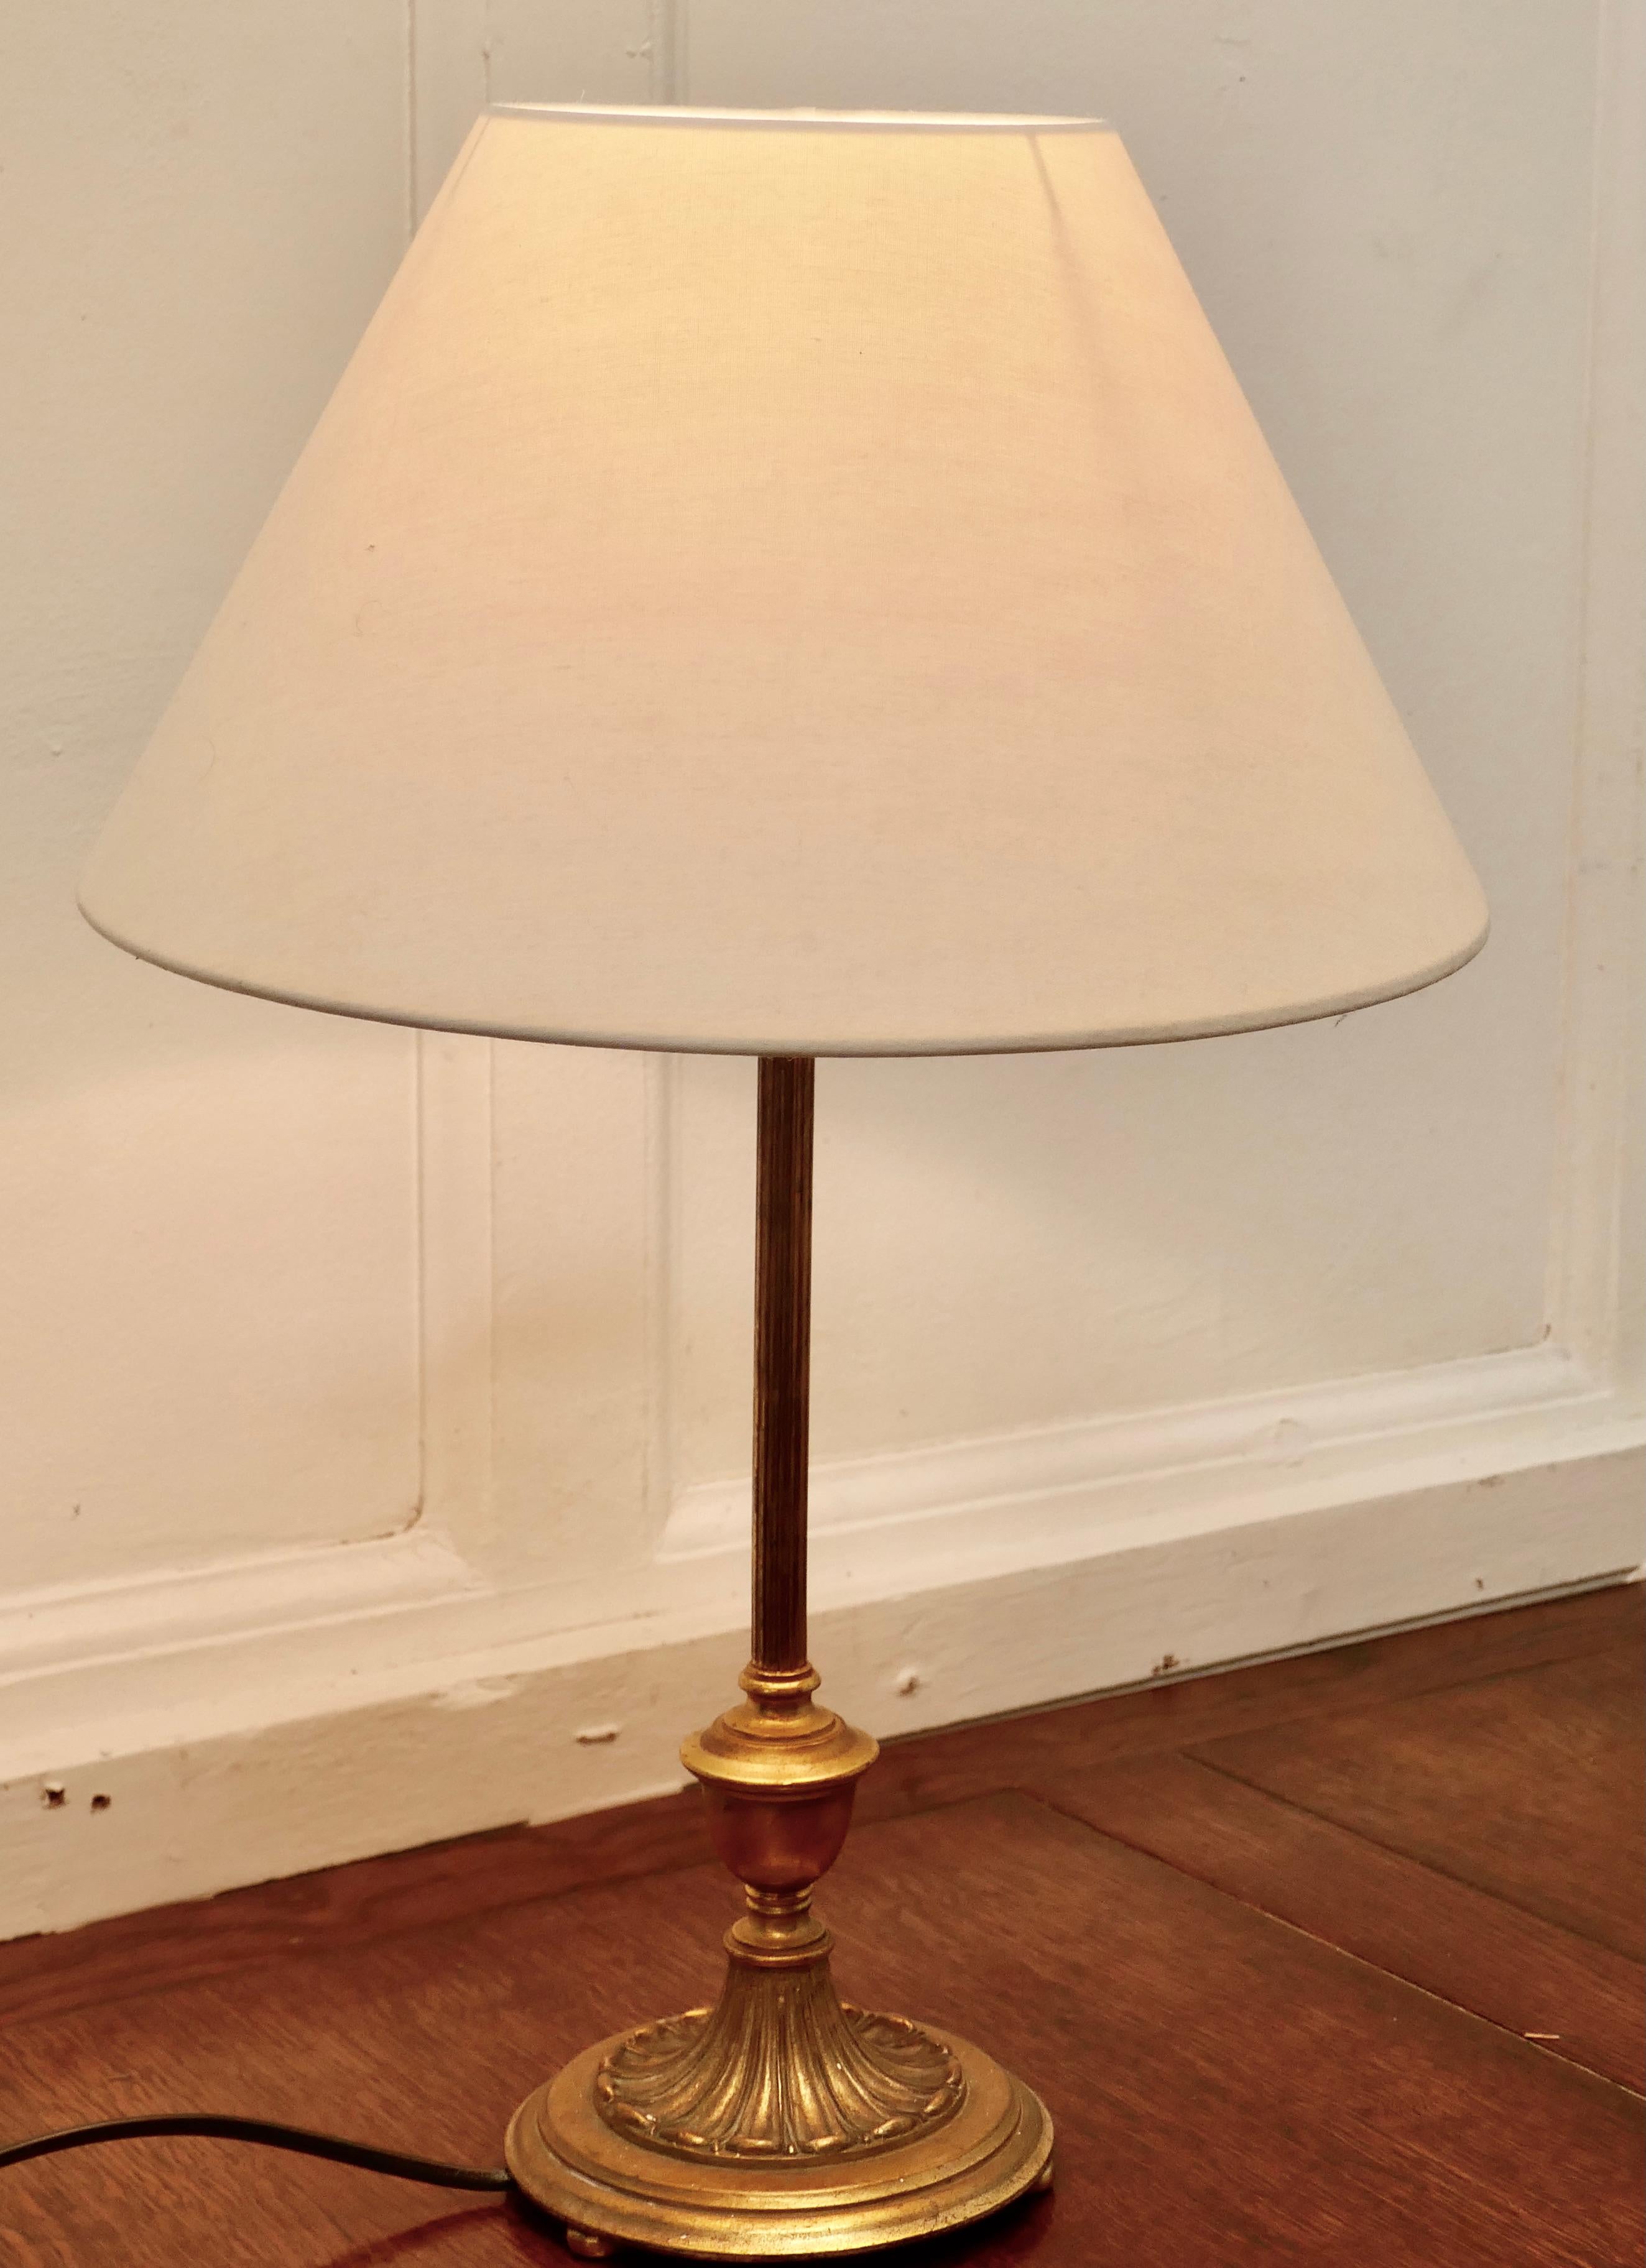 Tall brass Arts & Crafts table lamp 

A decorative table lamp, the base is circular decorated in the classical style with a slender column
The lamp has a pretty cone shaped shade, it is in good working order, it is 19” tall, and the shade is 12”